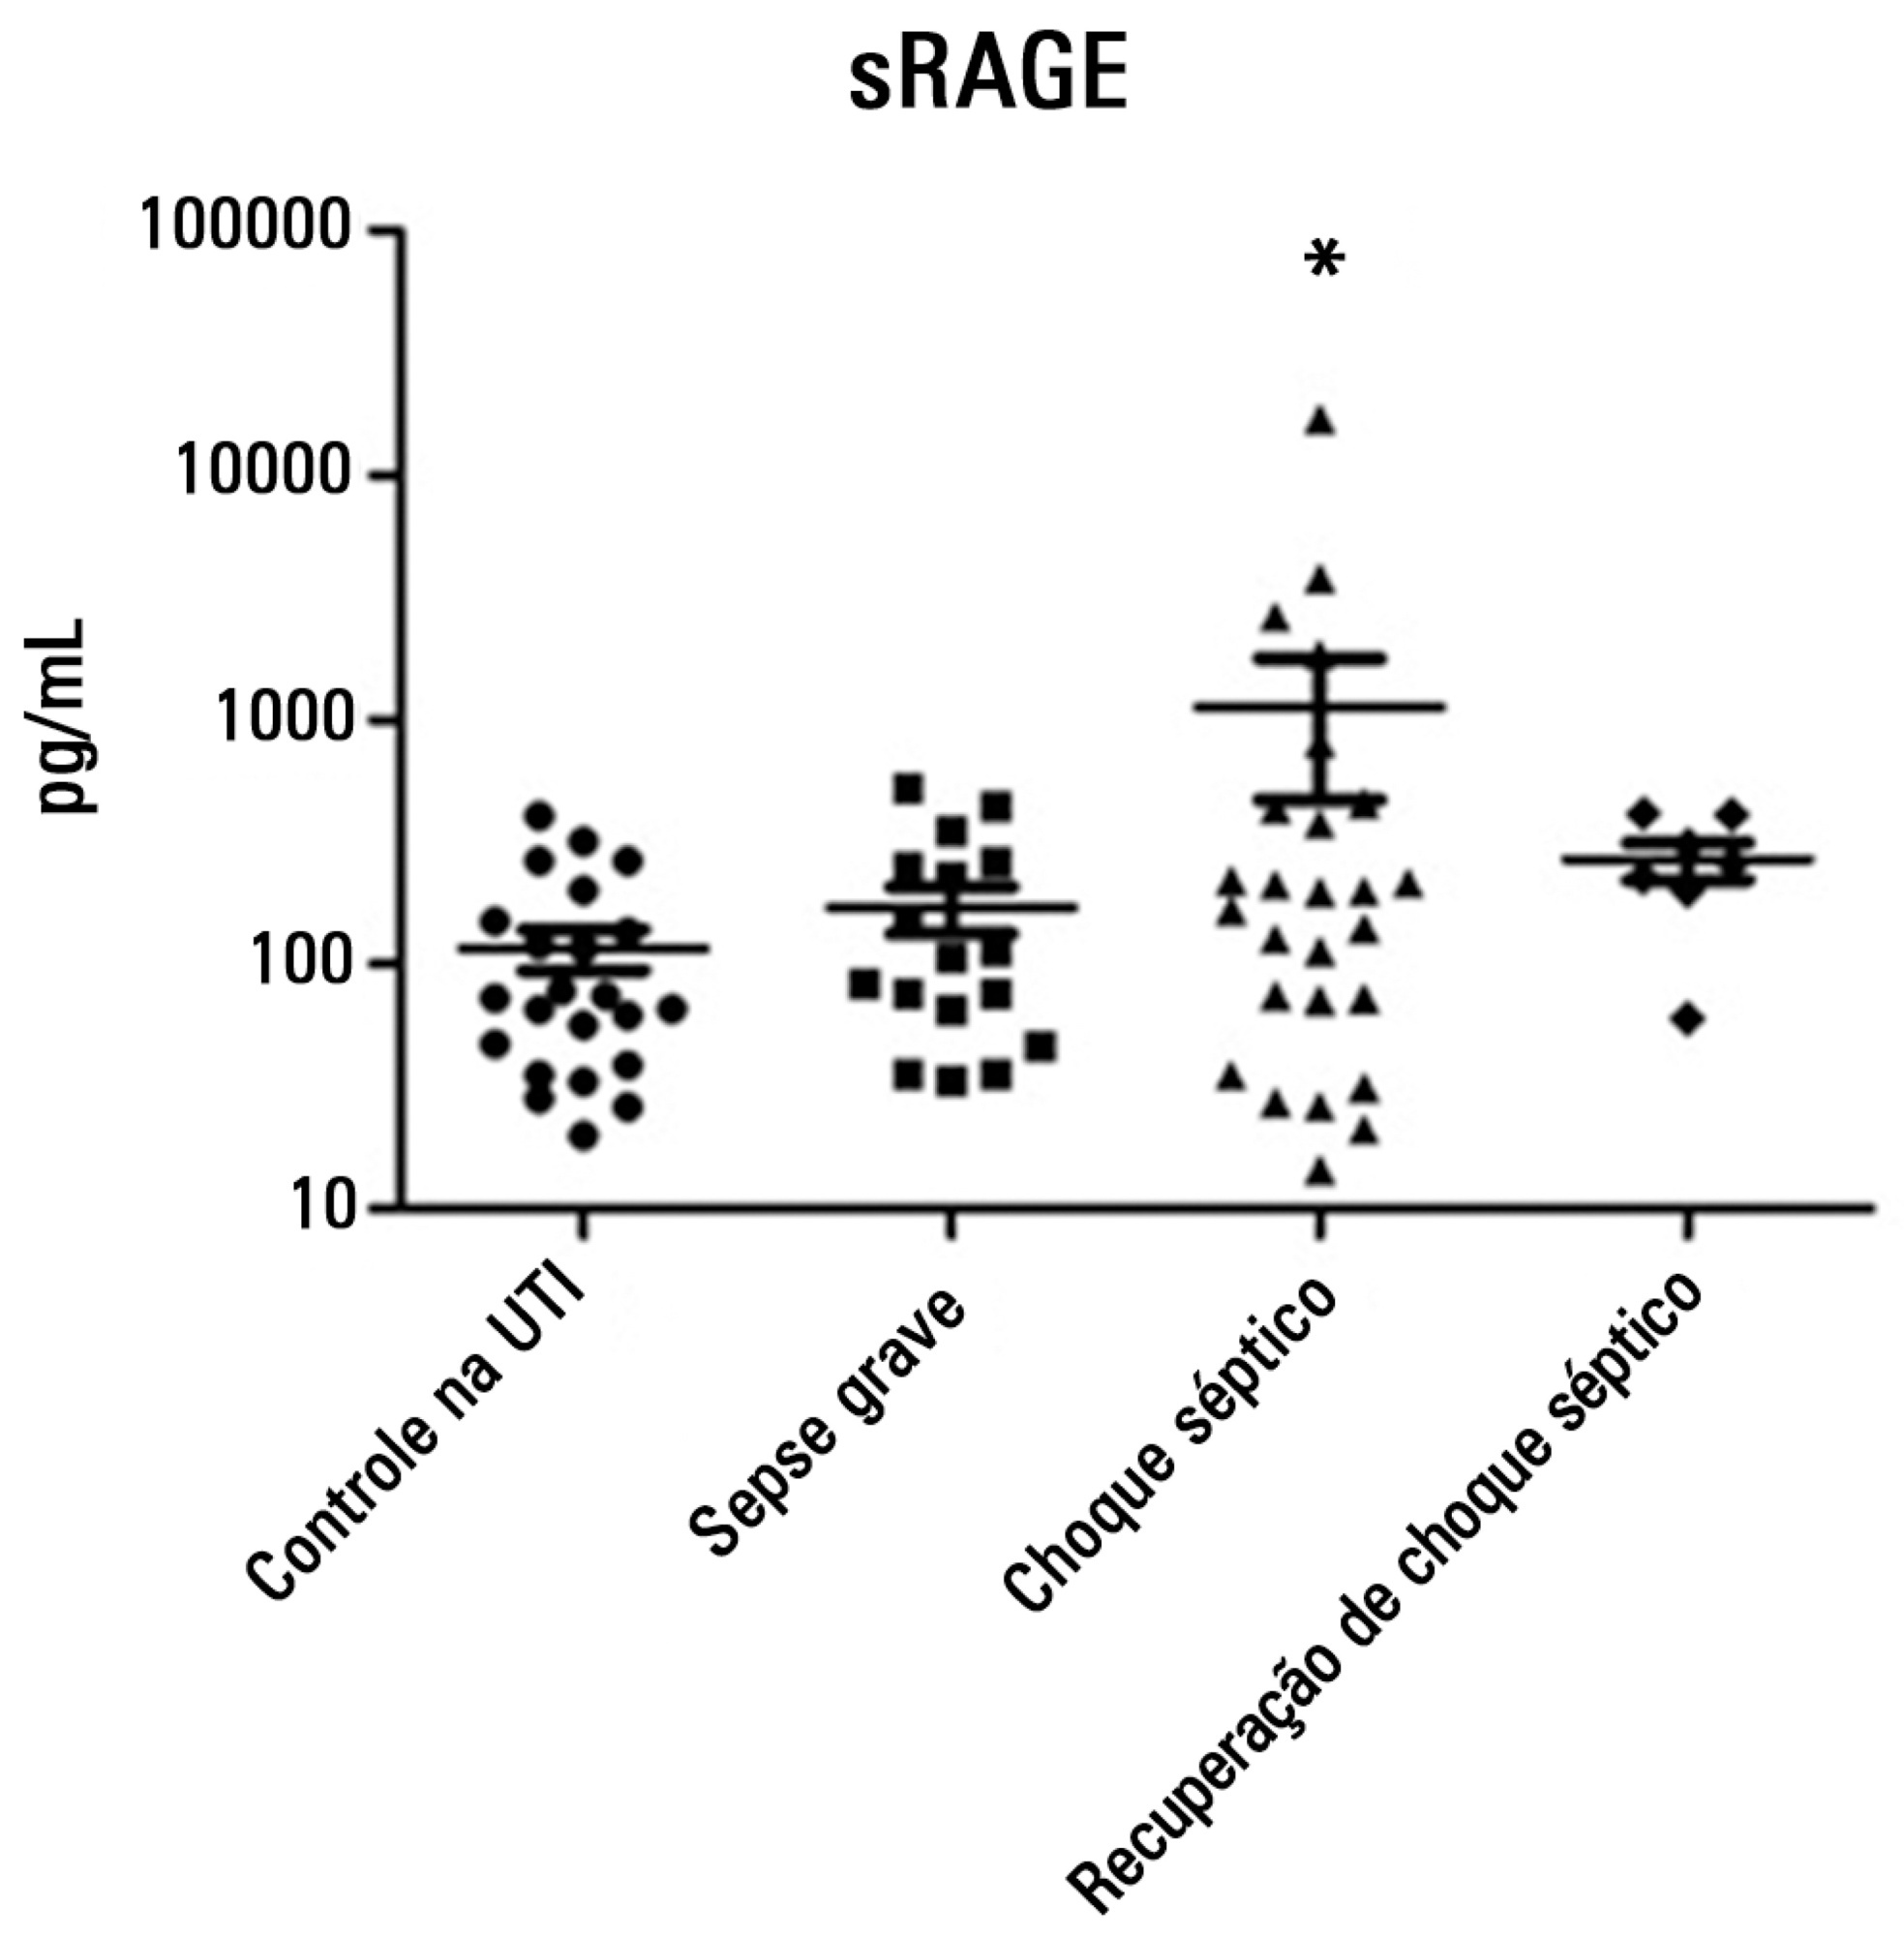 sRAGE in septic shock: a potential biomarker of mortality